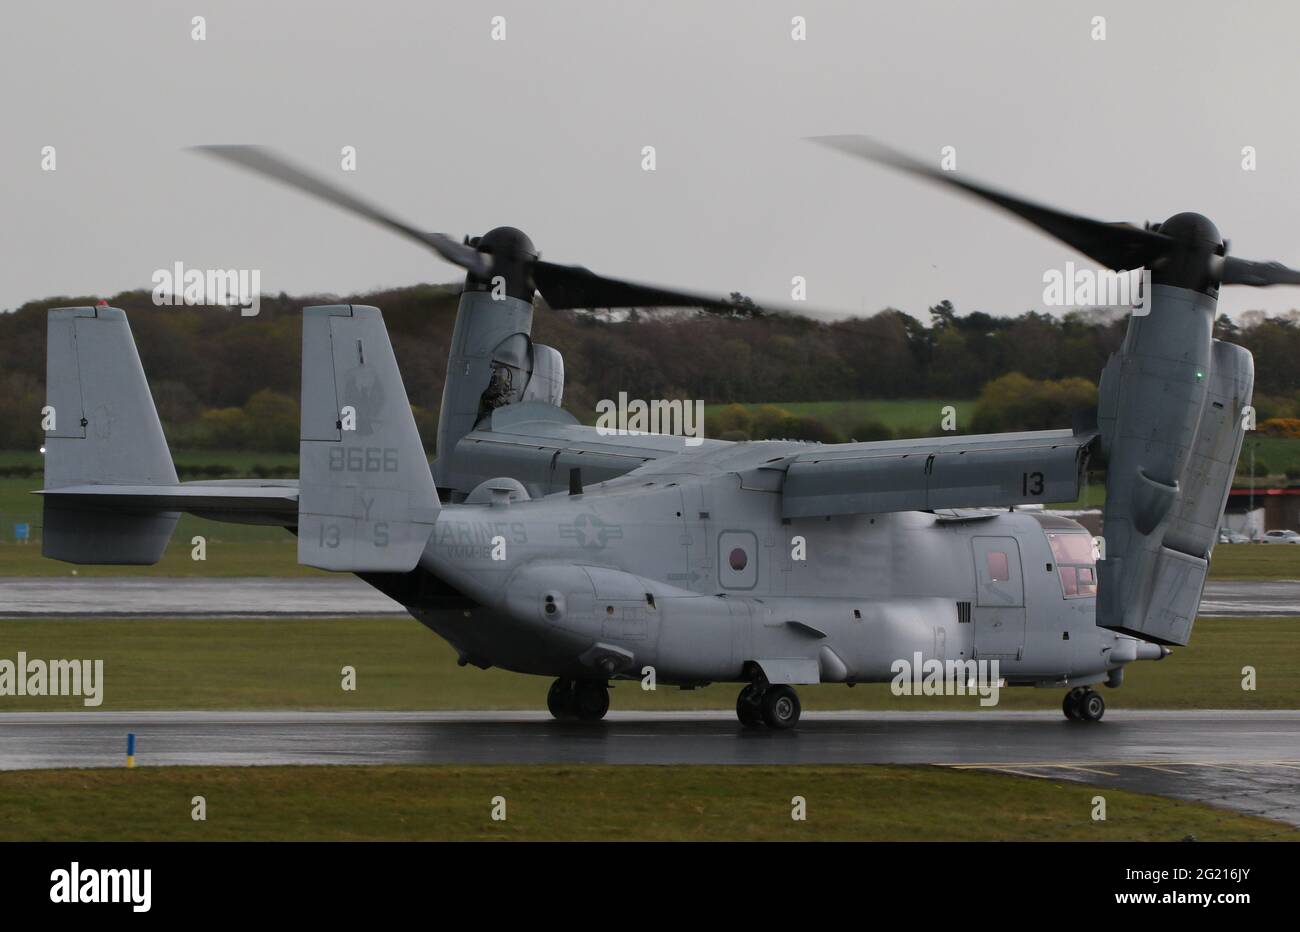 168666, a Bell Boeing MV-22B Osprey operated by the United States Marine Corps, departing from Prestwick International Airport in Ayrshire, Scotland. Stock Photo